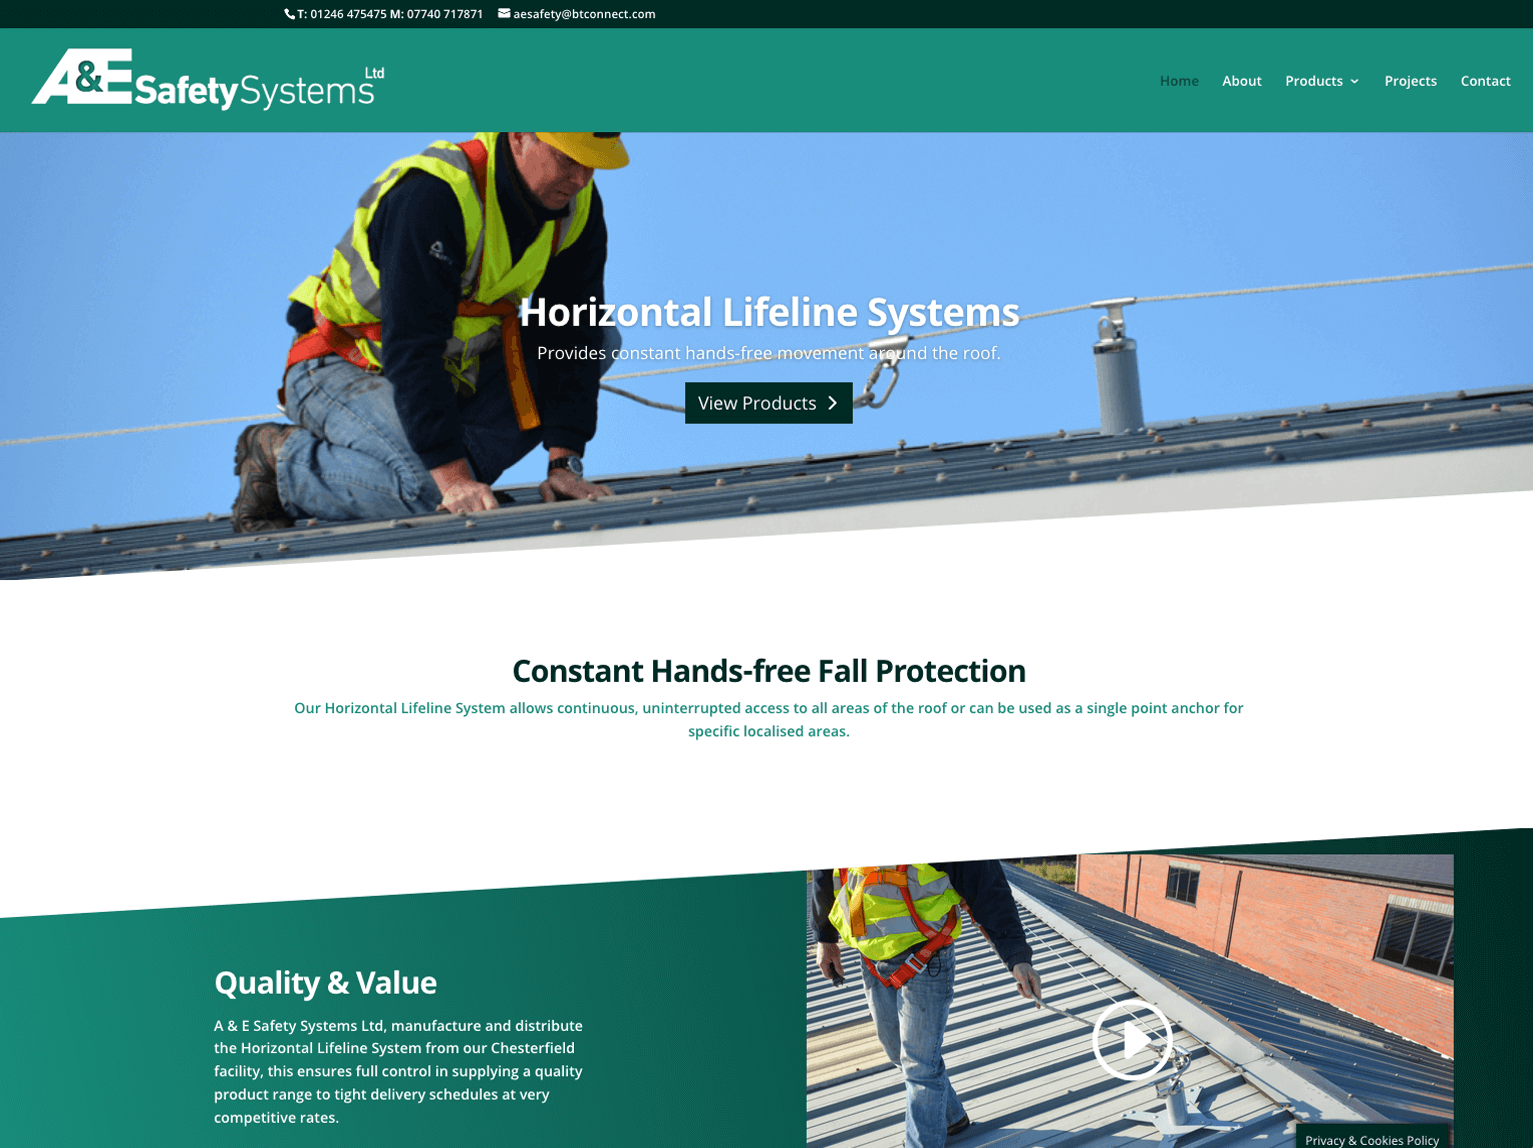 A & E Safety Systems website home page